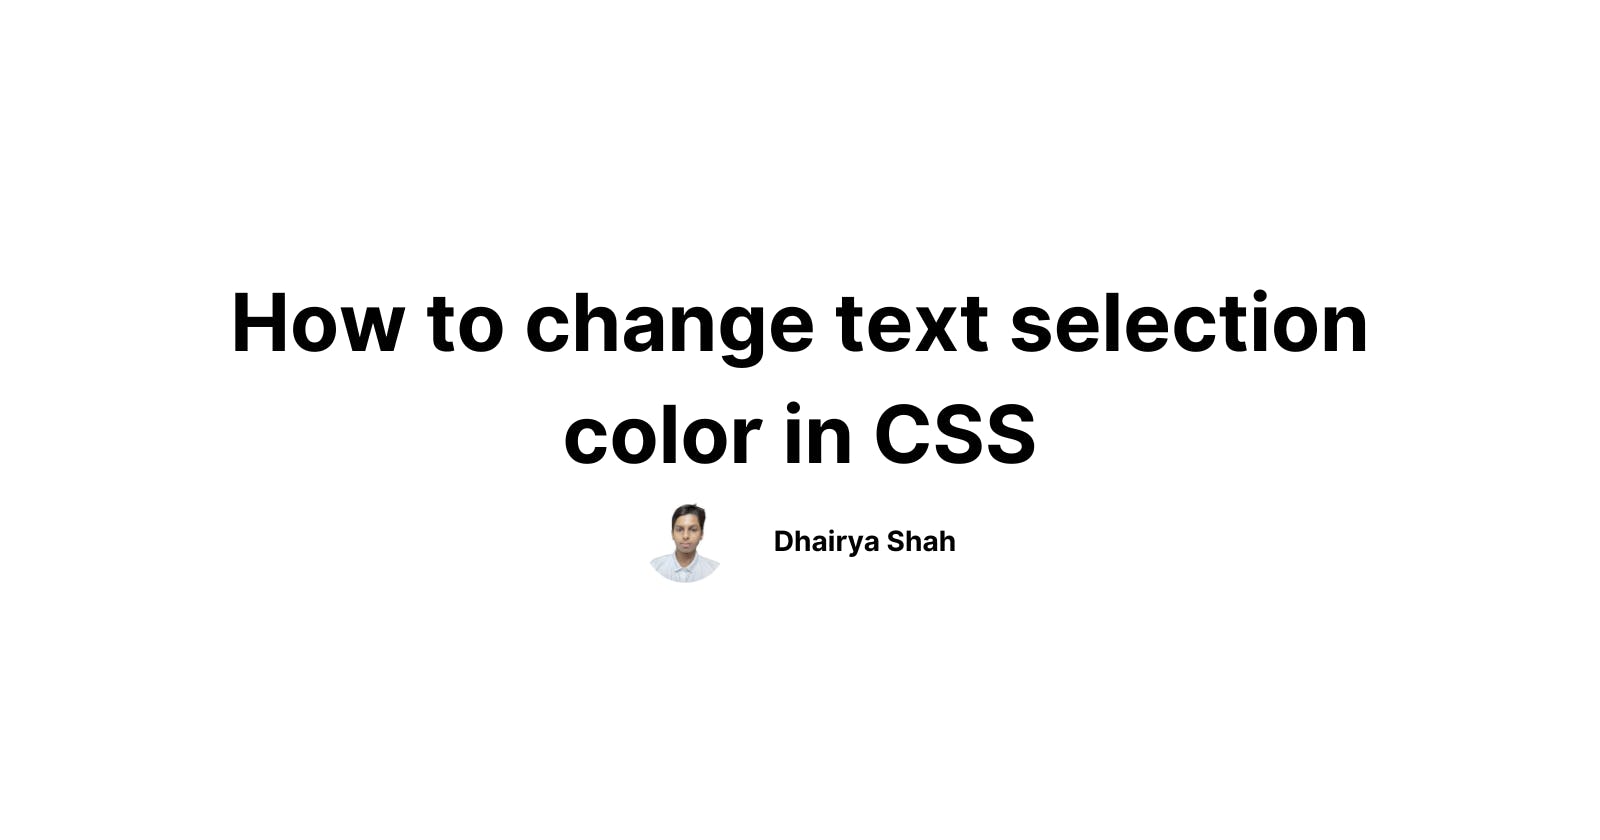 How to change text selection color in CSS